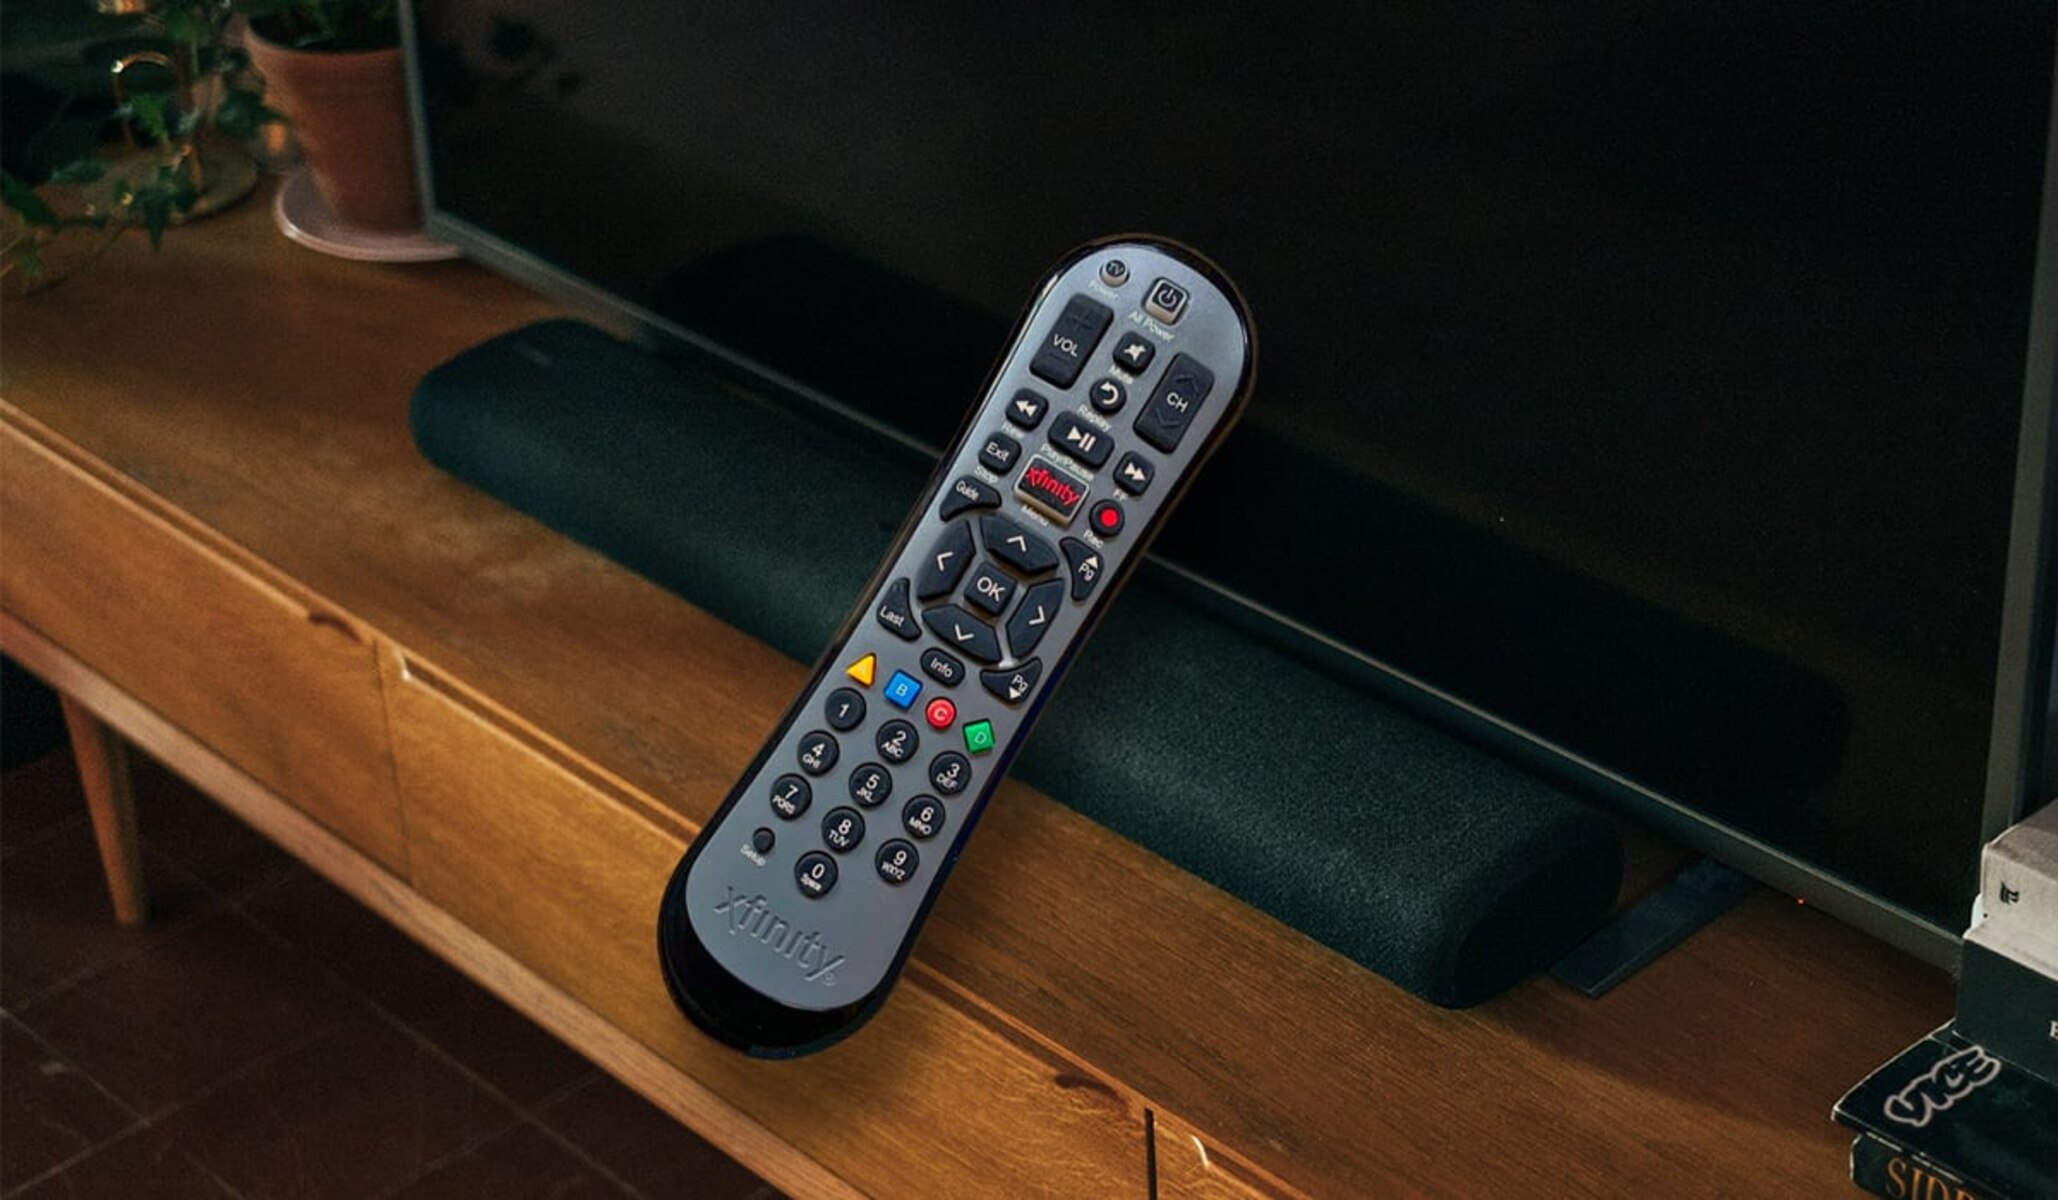 How To Connect Xfinity Comcast Remote To Sony Surround Sound System For Playback